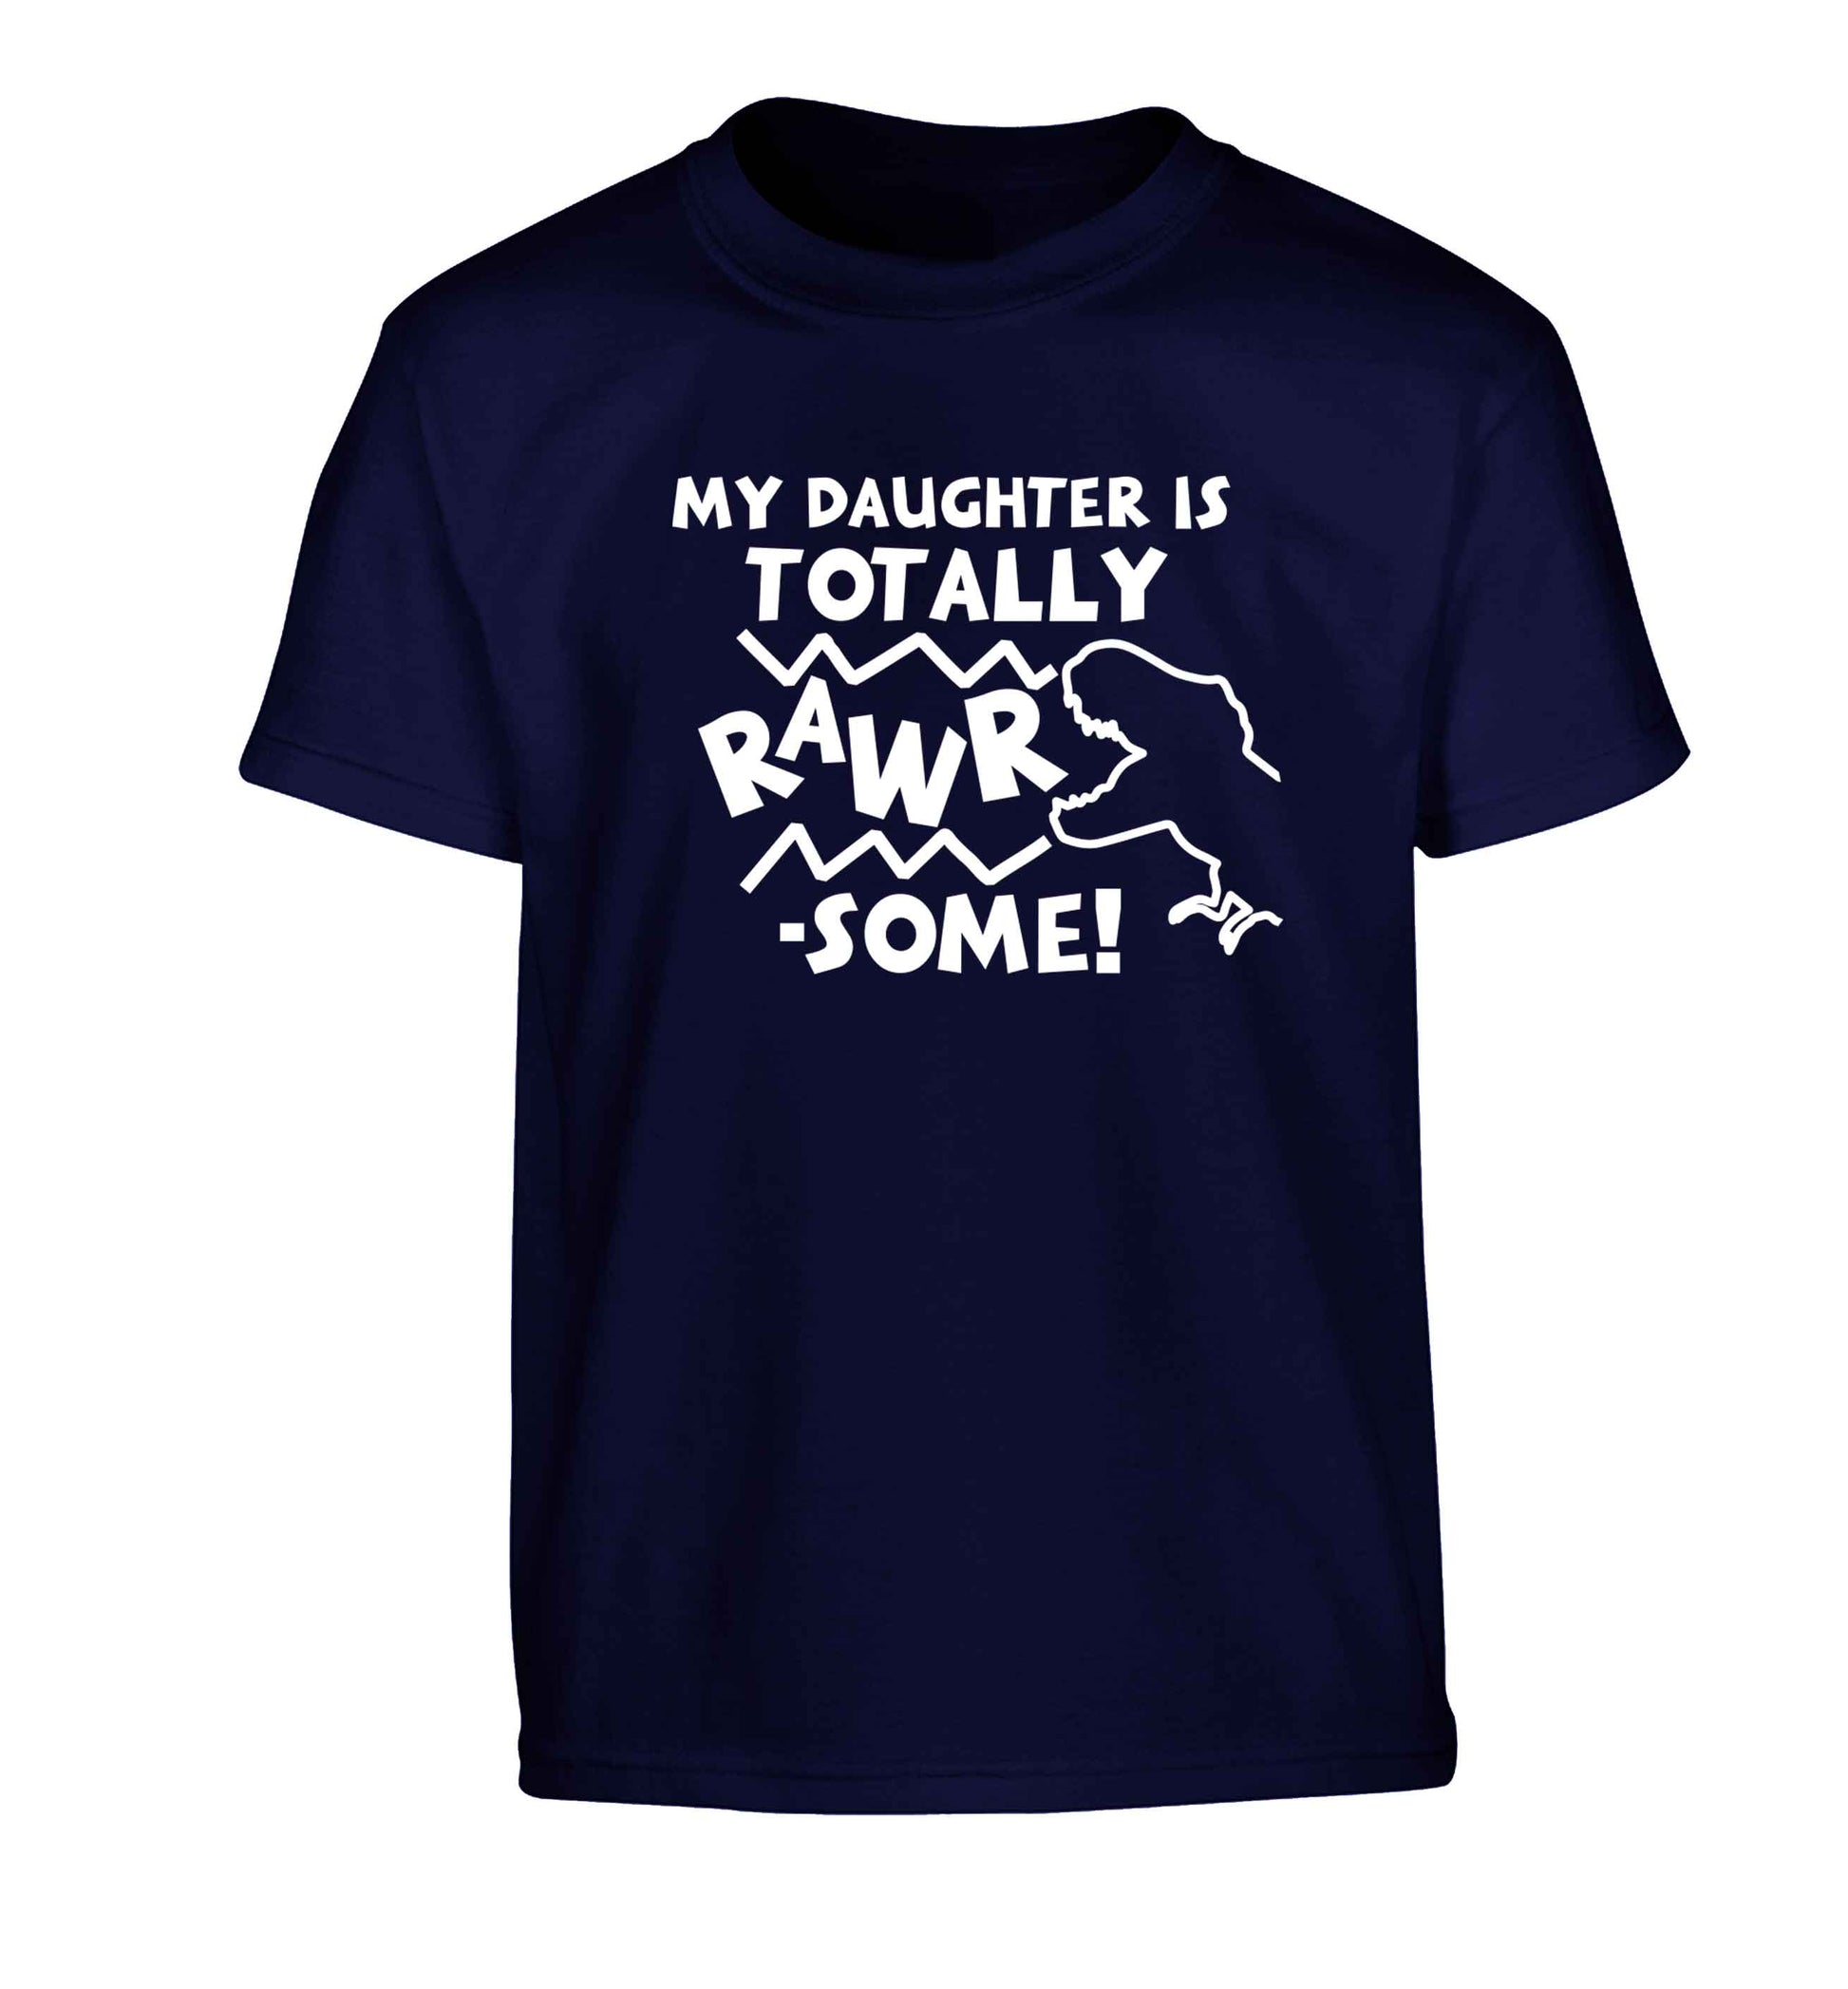 My daughter is totally rawrsome Children's navy Tshirt 12-13 Years